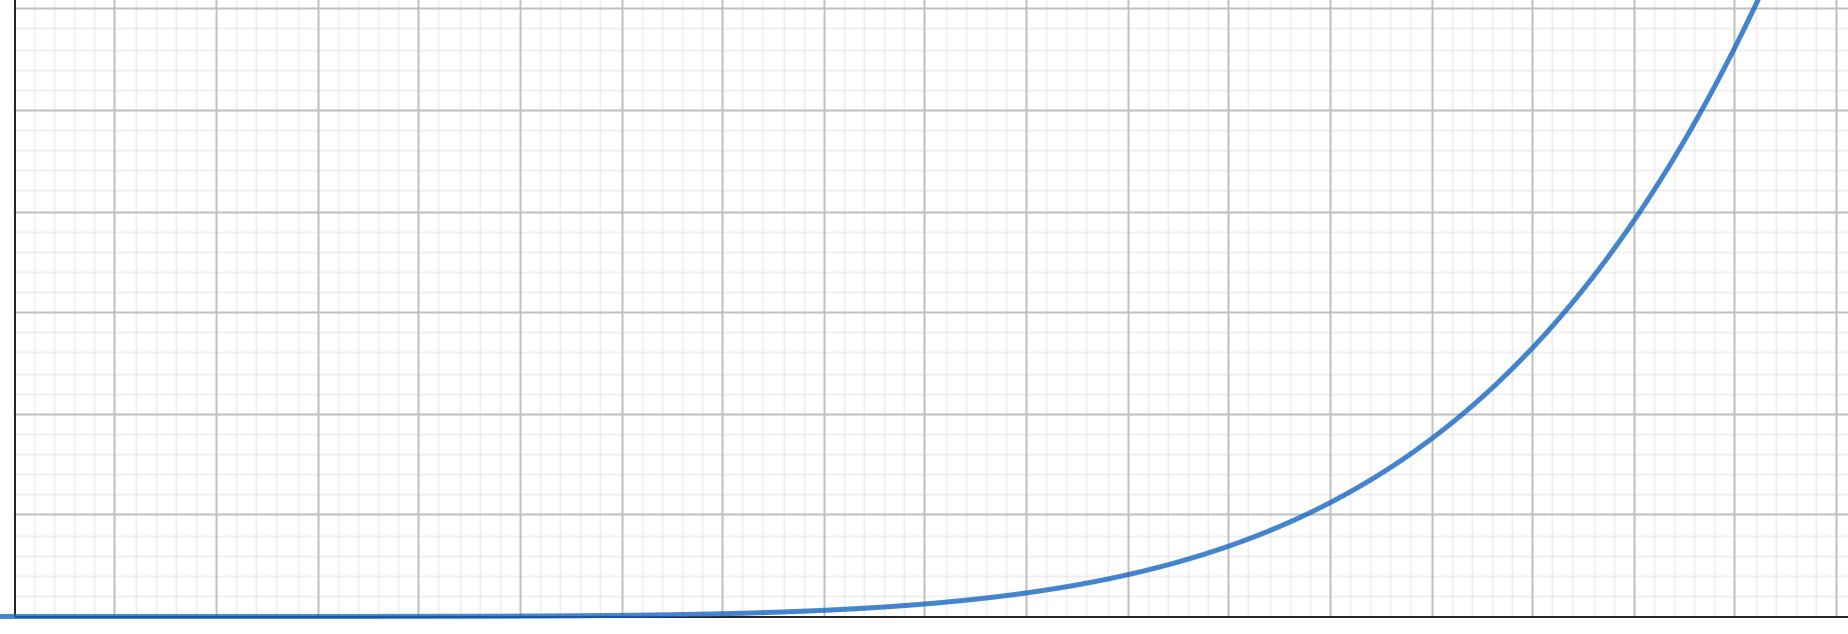 A graph of y=x^p, where p > 1, in a range of 0 to 1.